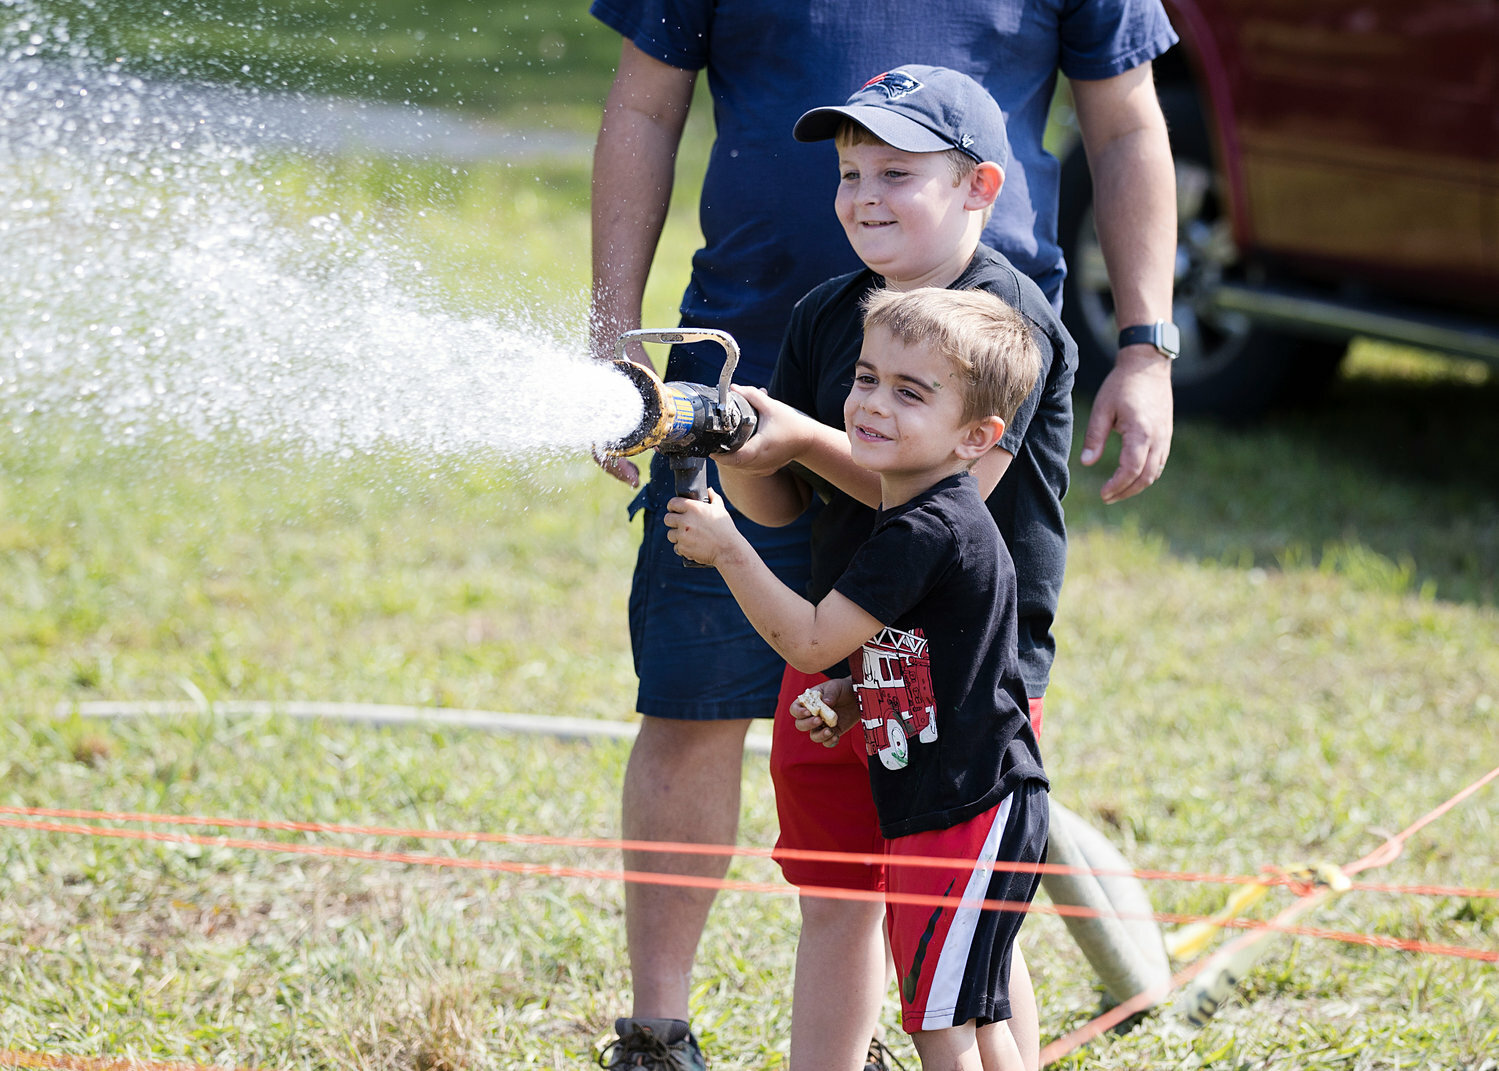 Shawn Little (in back) and Henry Sleeper help the Warren Fire Department saturate the mud at last year’s Boldrdash's "Thrive Outside in the Mud”.